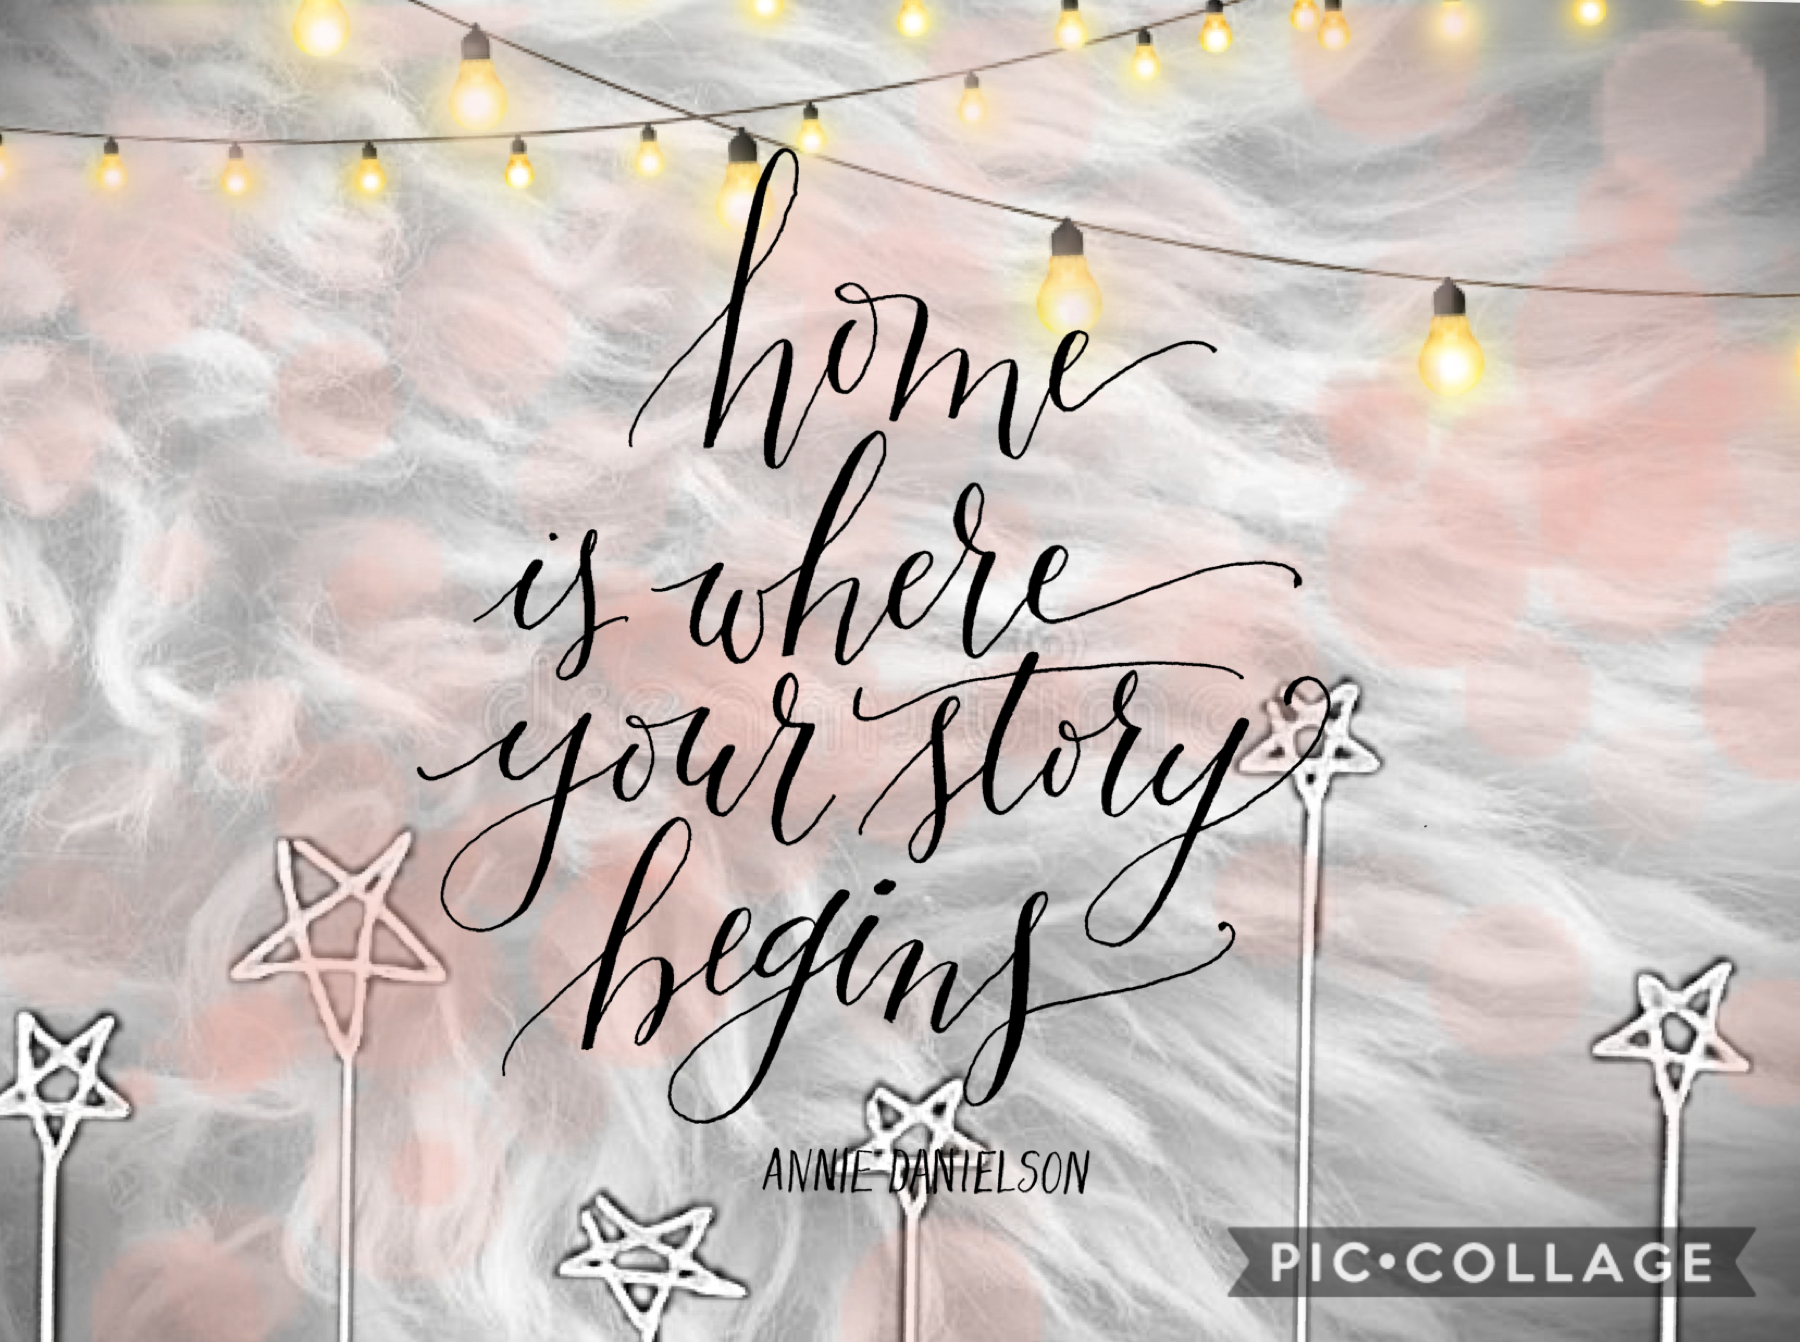 “Home is where your story begins”